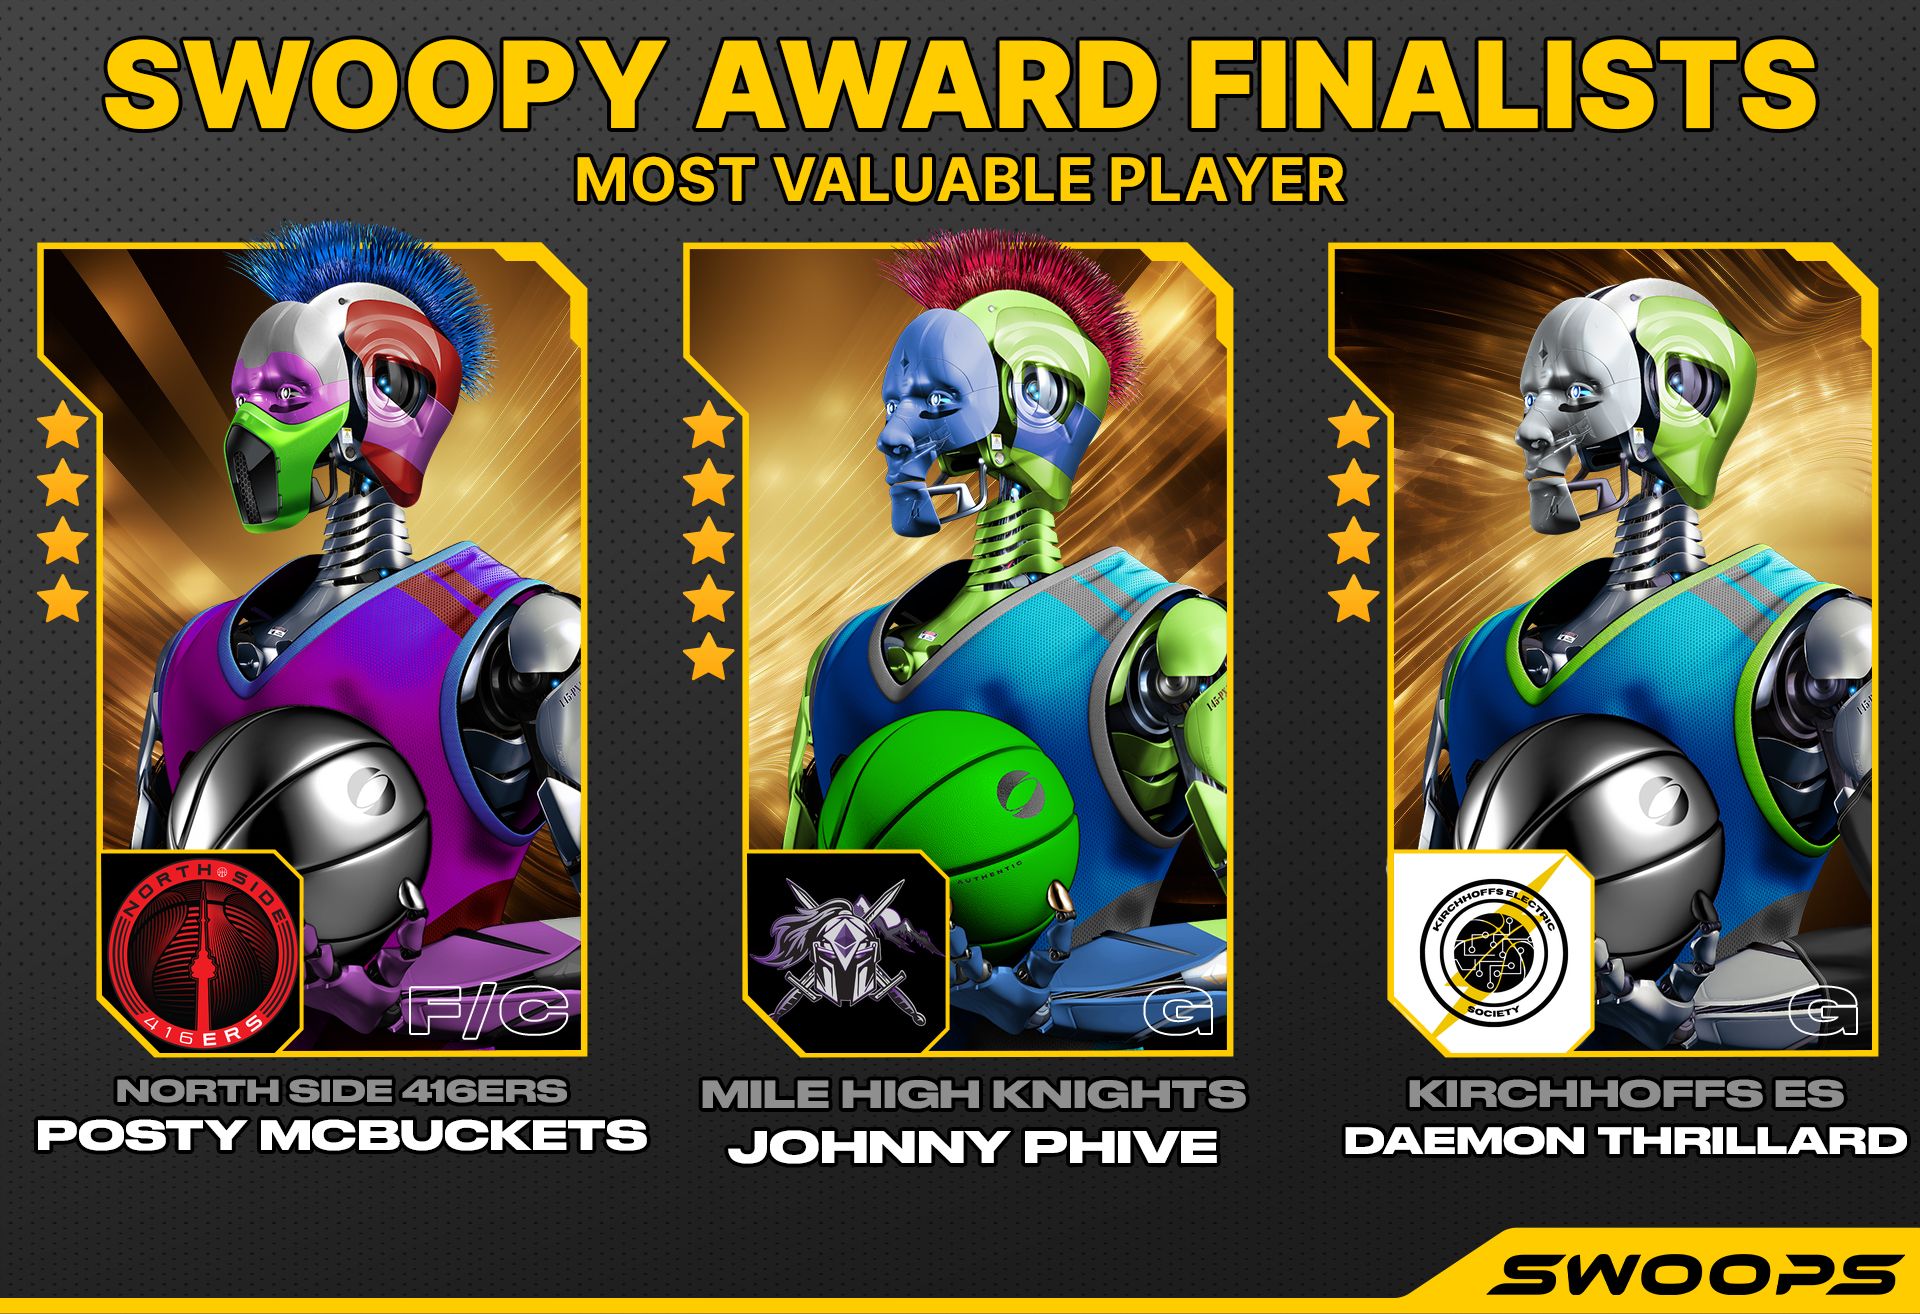 SWOOPY AWARDS OVERVIEW